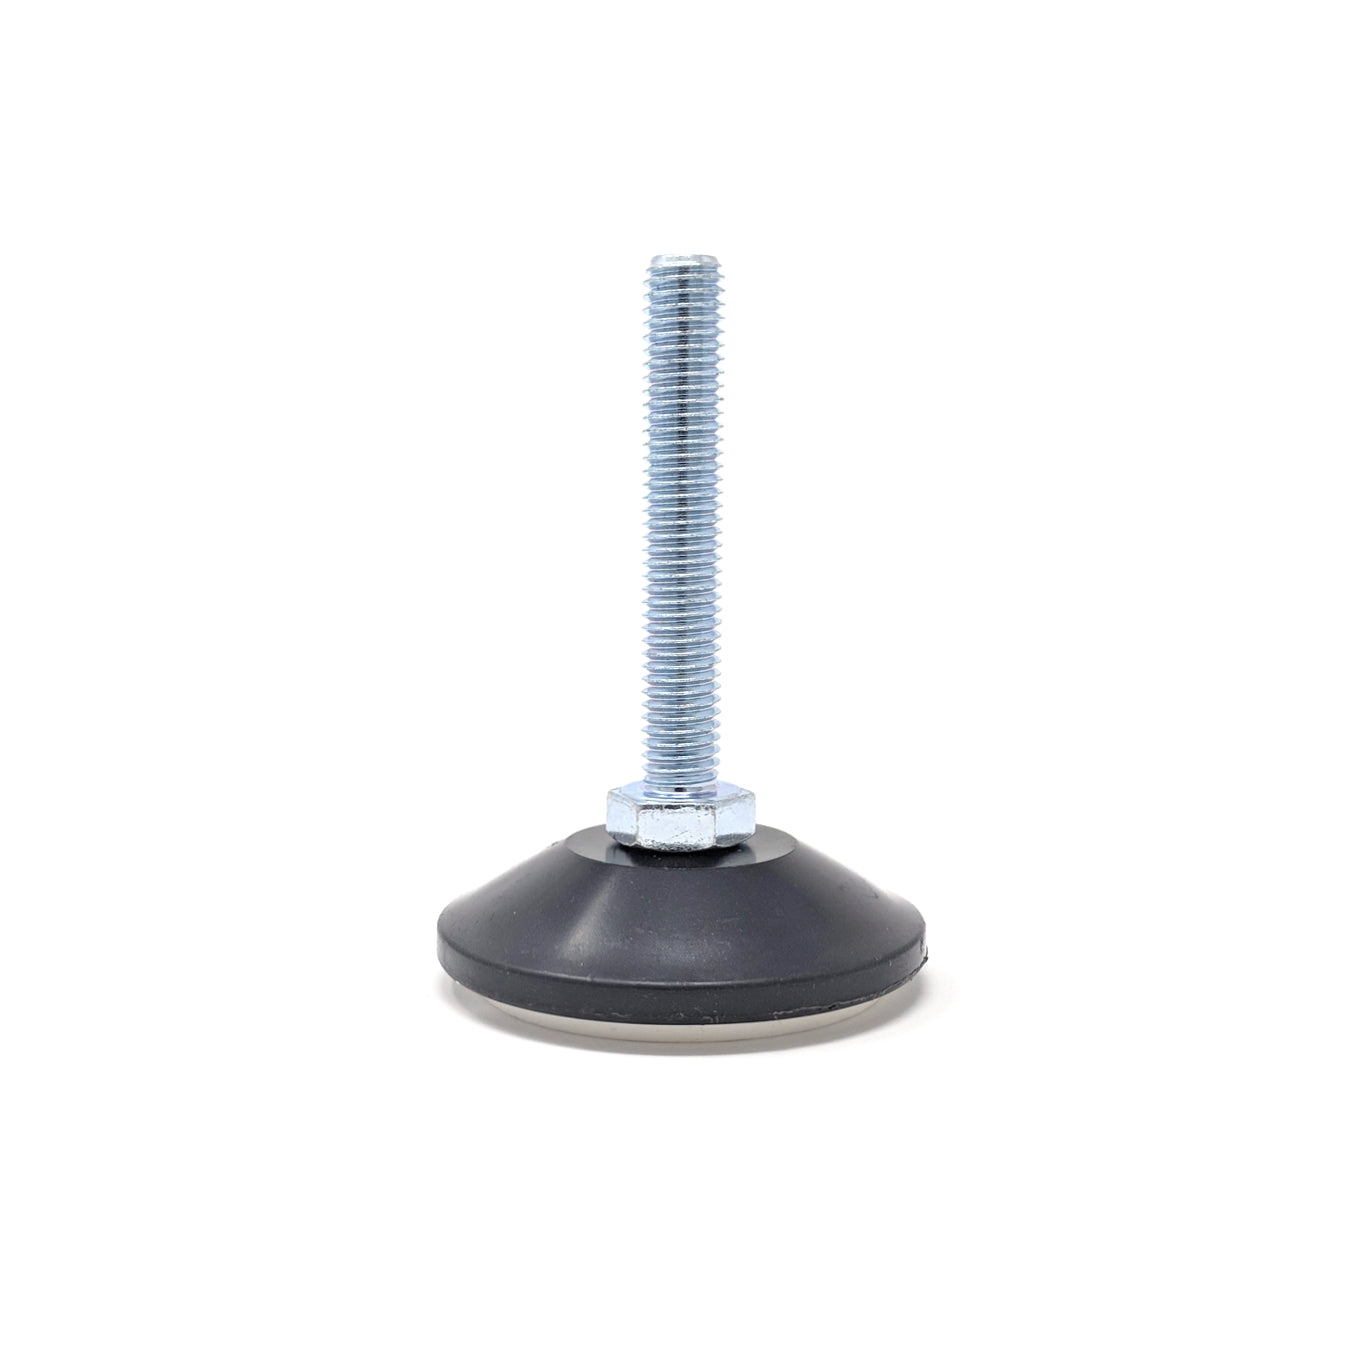 48mm-M8x50mm Non-Slip Screw In Levelling Machine Feet Height Adjustable, Made In Germany - Keay Vital Parts